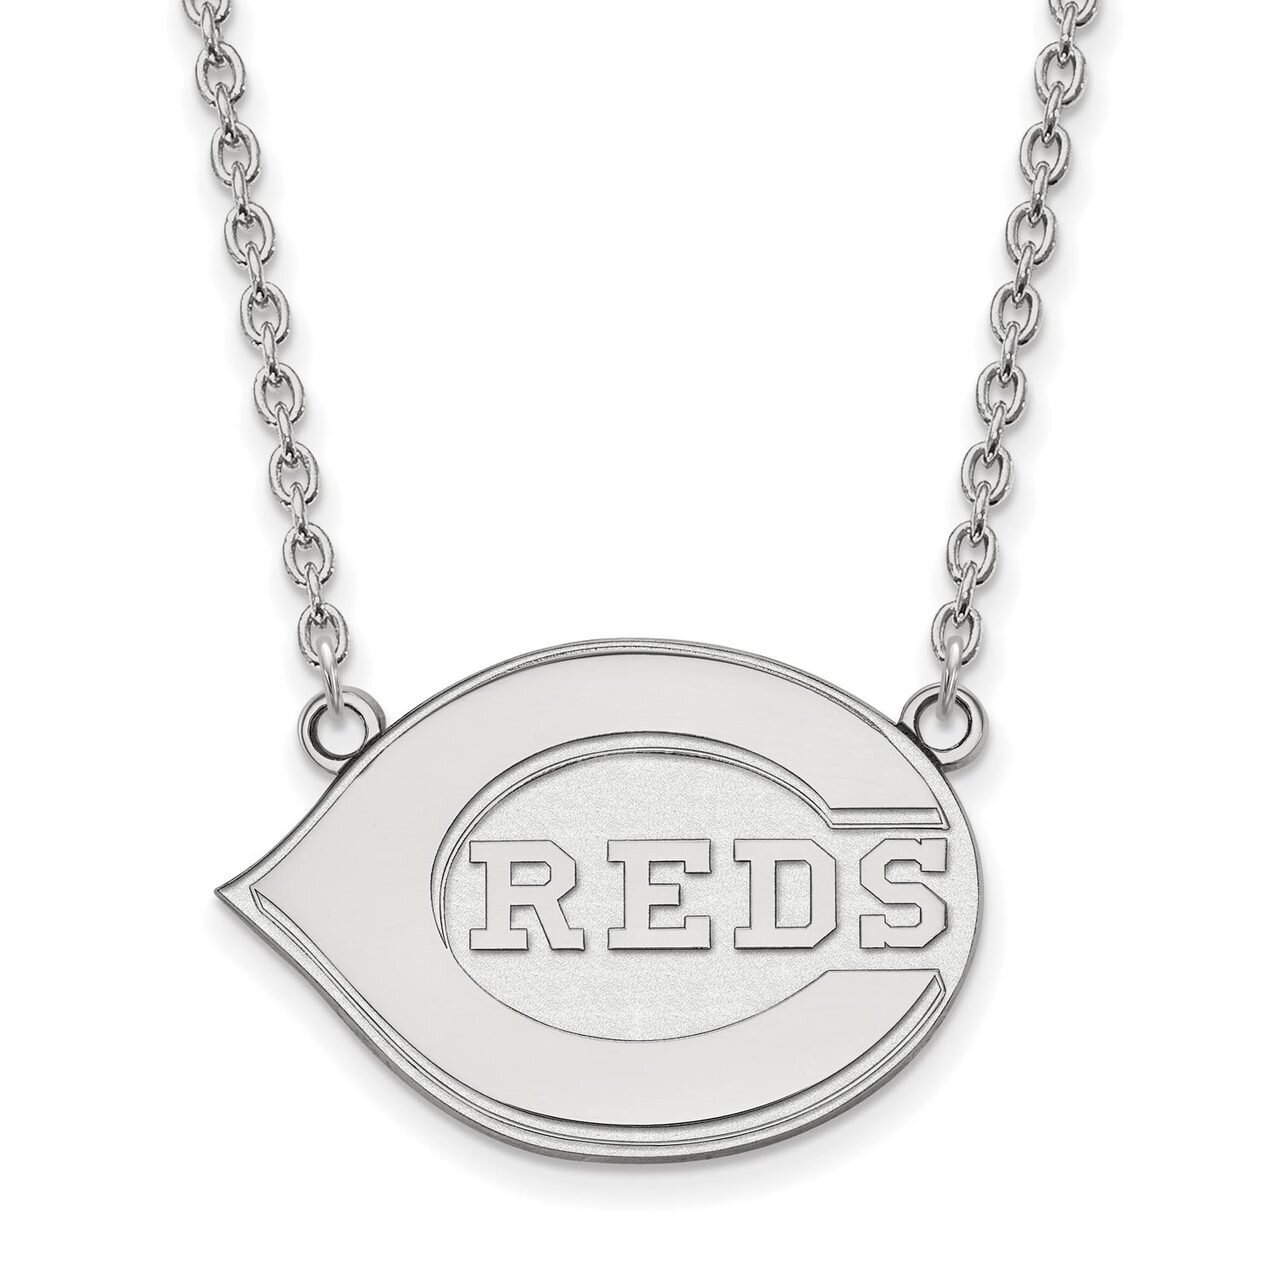 Cincinnati Reds Large Pendant with Chain Necklace 10k White Gold 1W010RDS-18